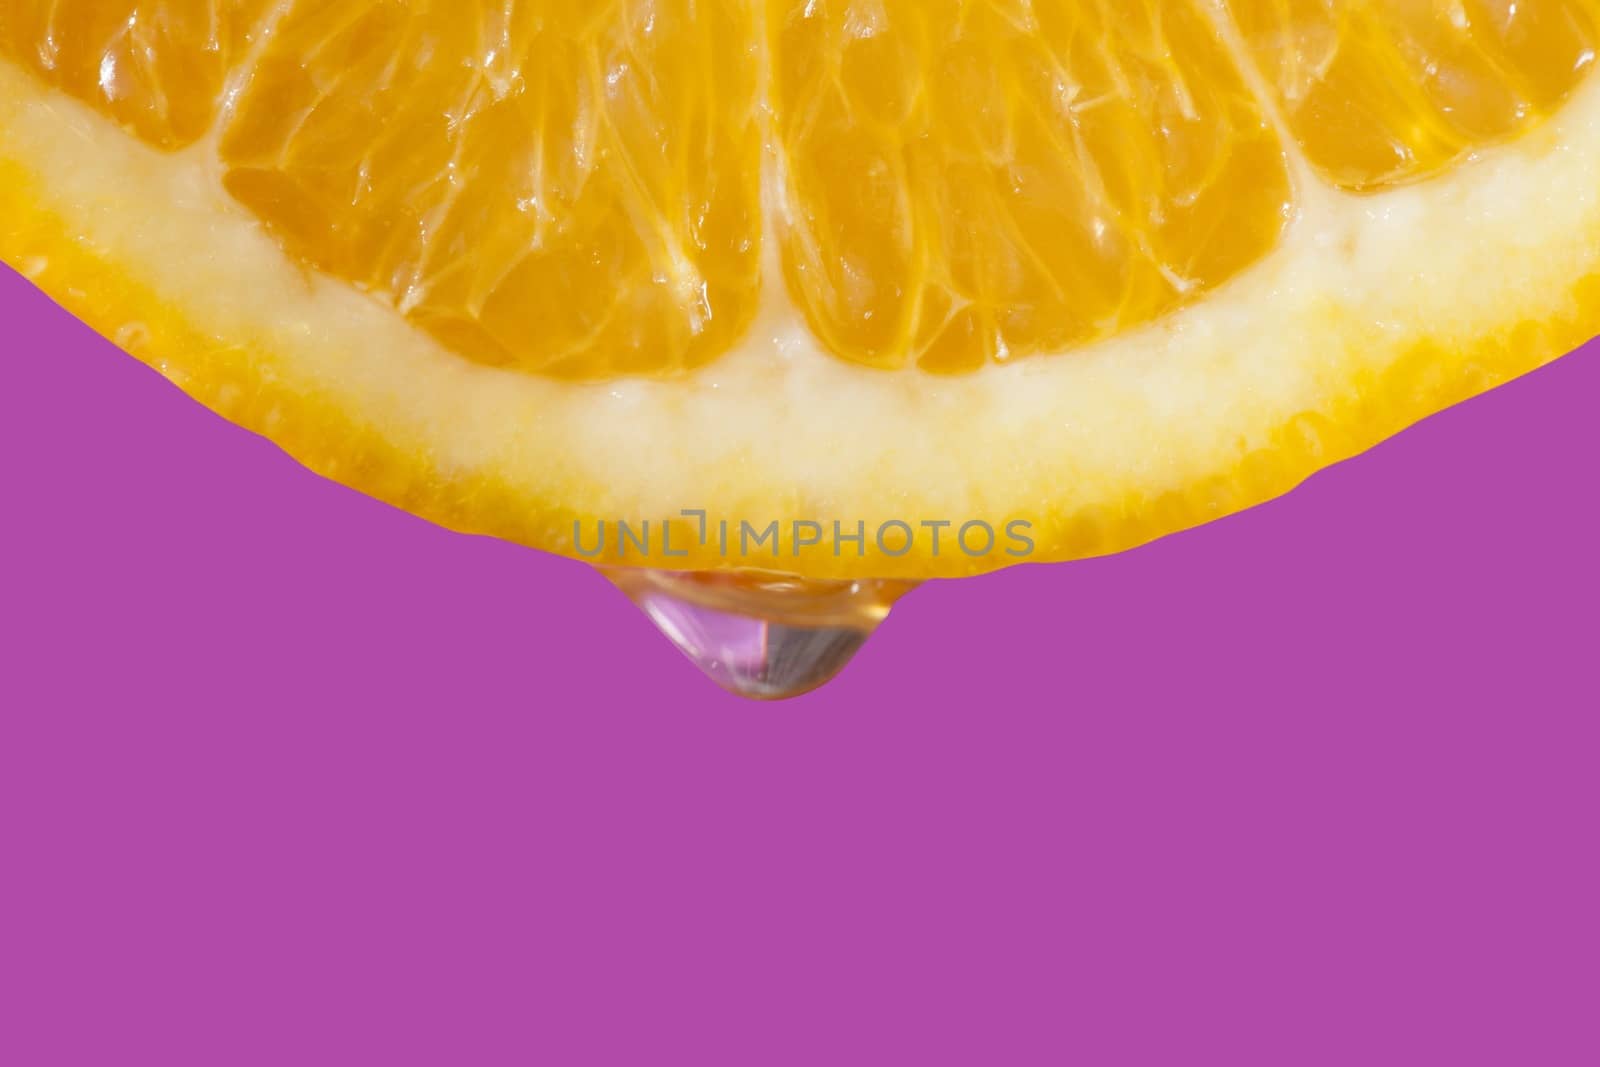 Macro picture of a slice of an orange with water drop